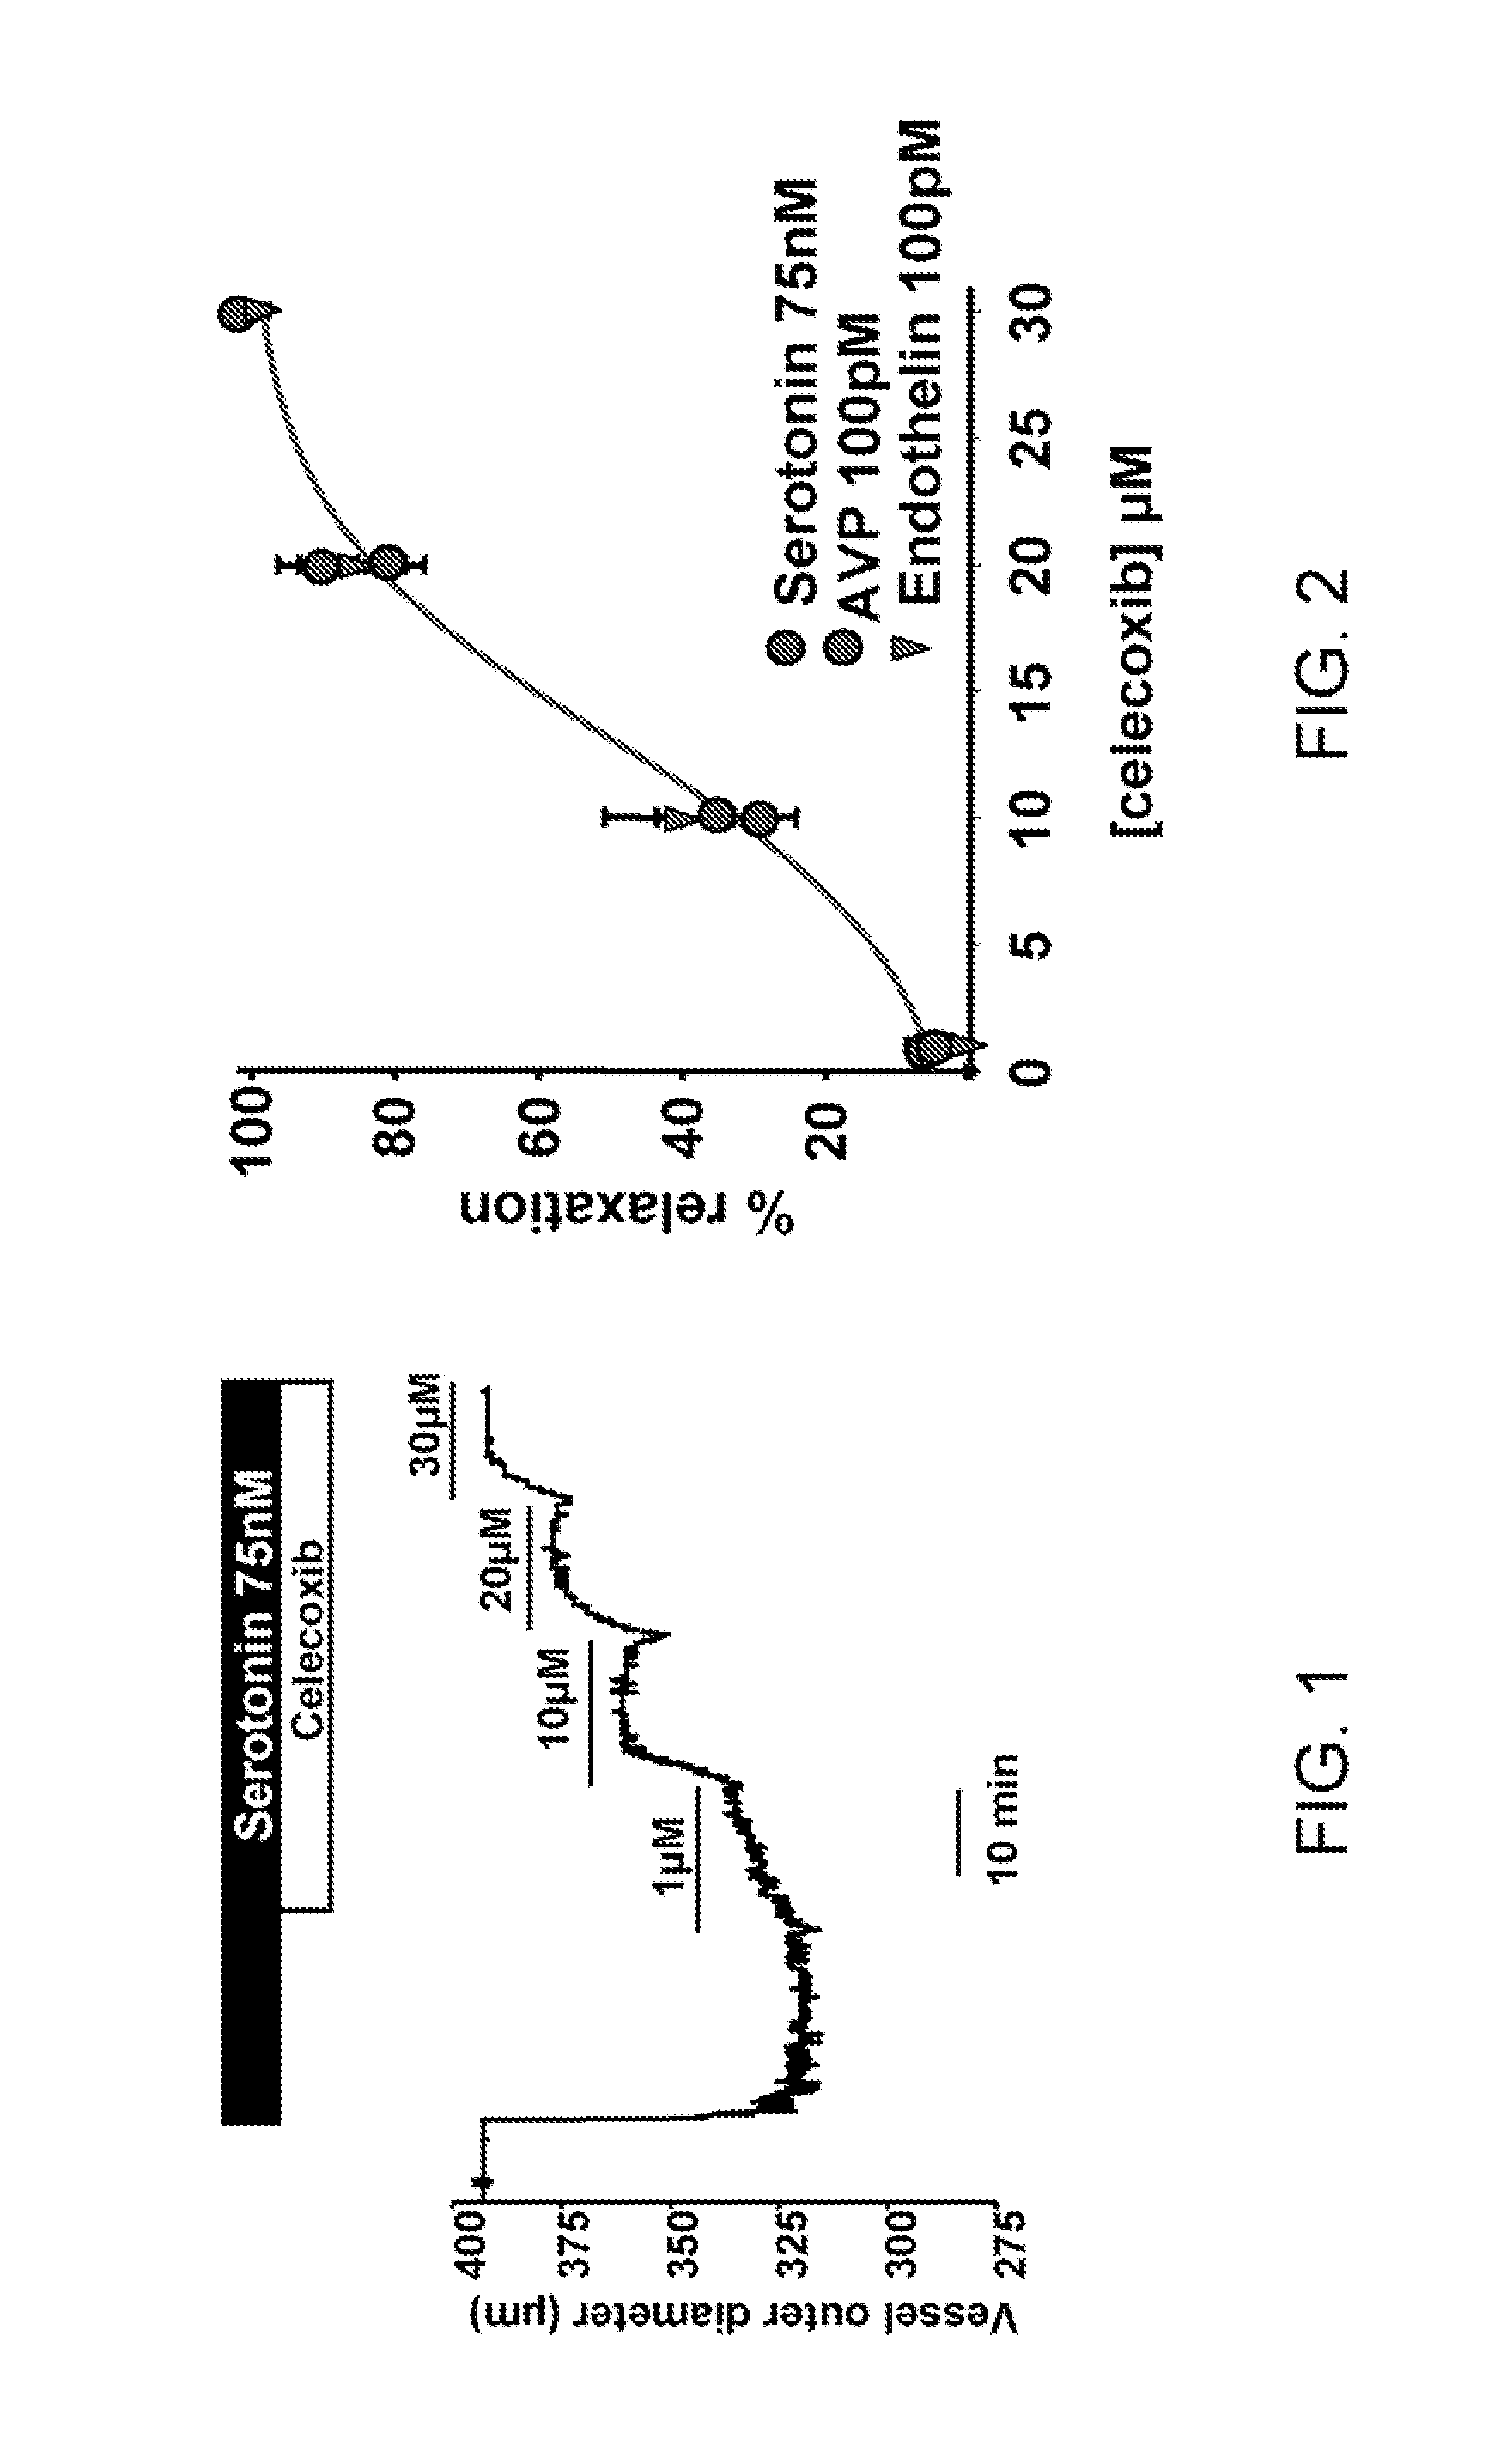 Methods of using proteinacious channels to identify pharmaceutical treatments and risks, and treatments resulting therefrom